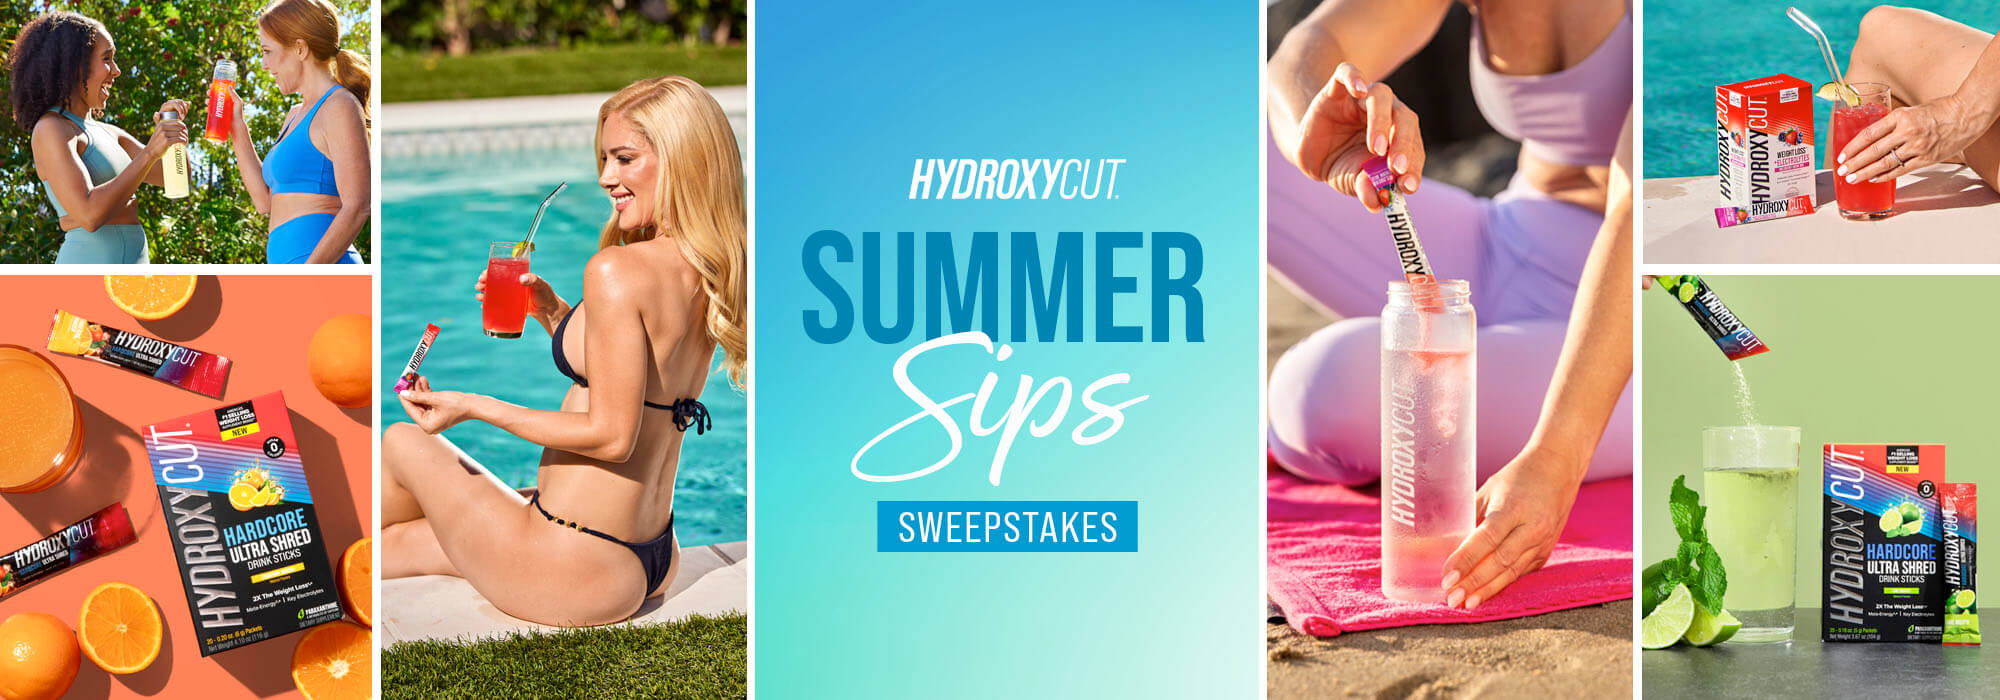 Hydroxycut Summer Sips Sweepstakes